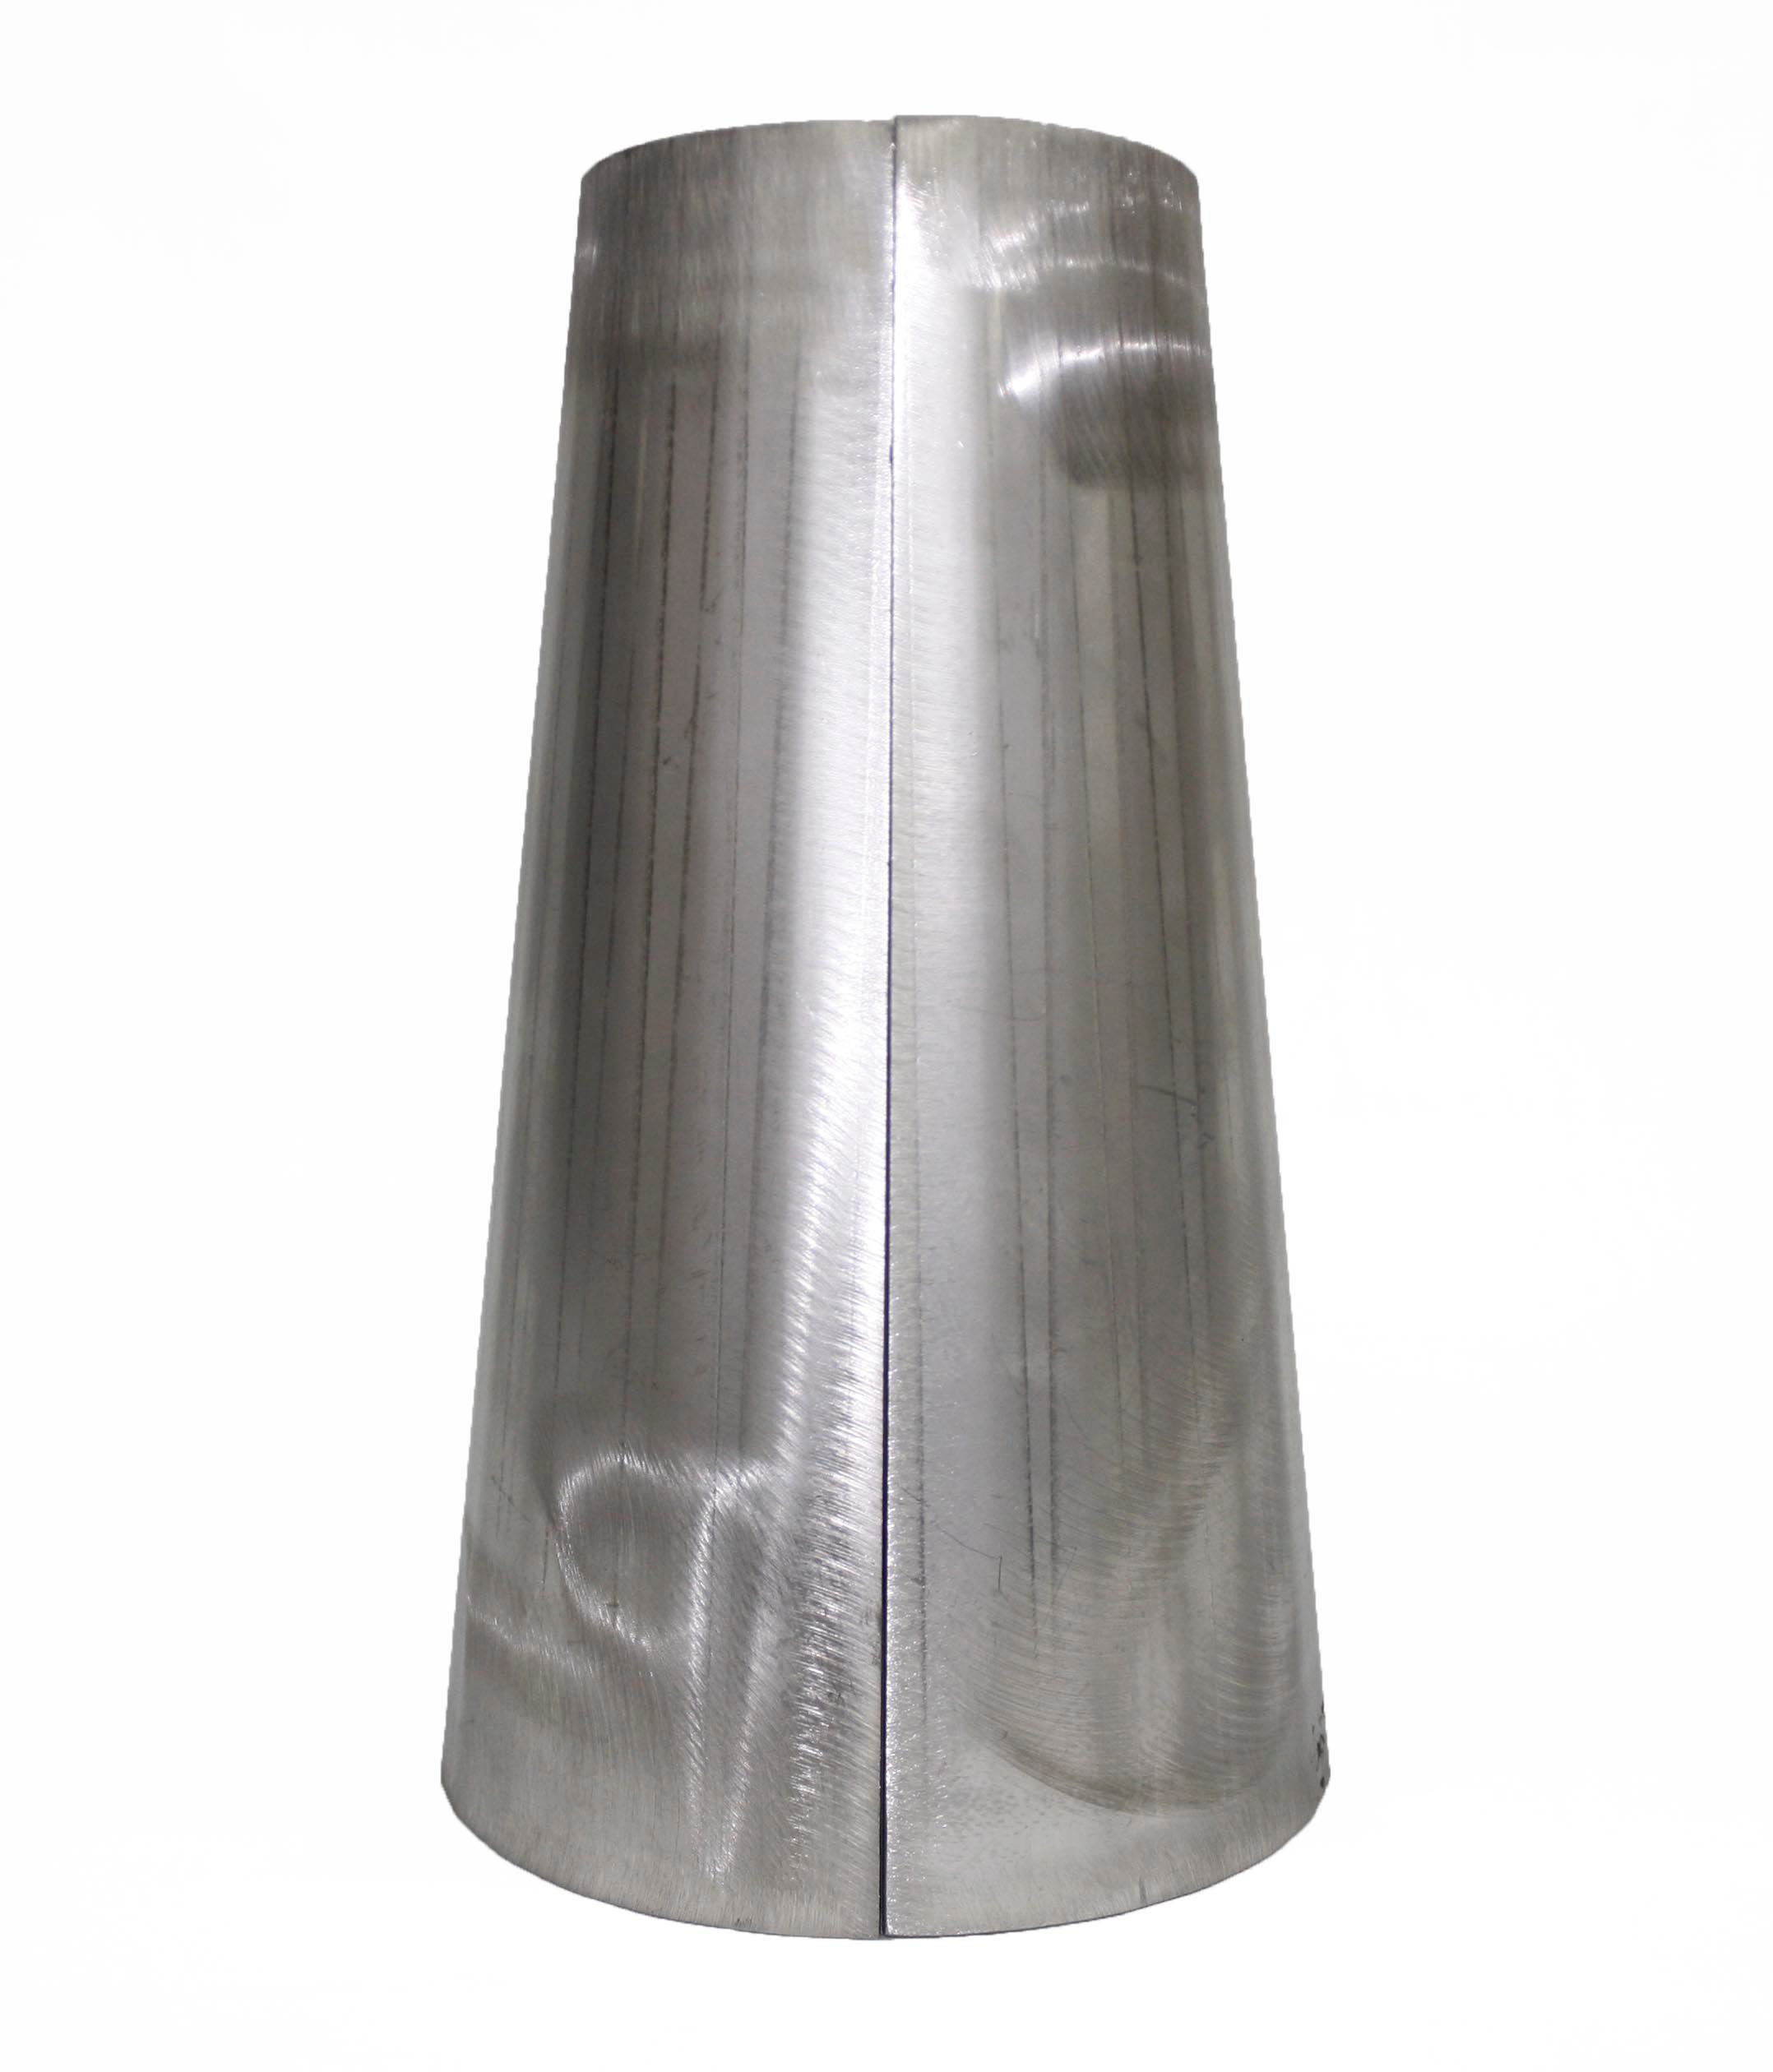 Stainless Steel - 11 GA. 2 piece cone bump formed